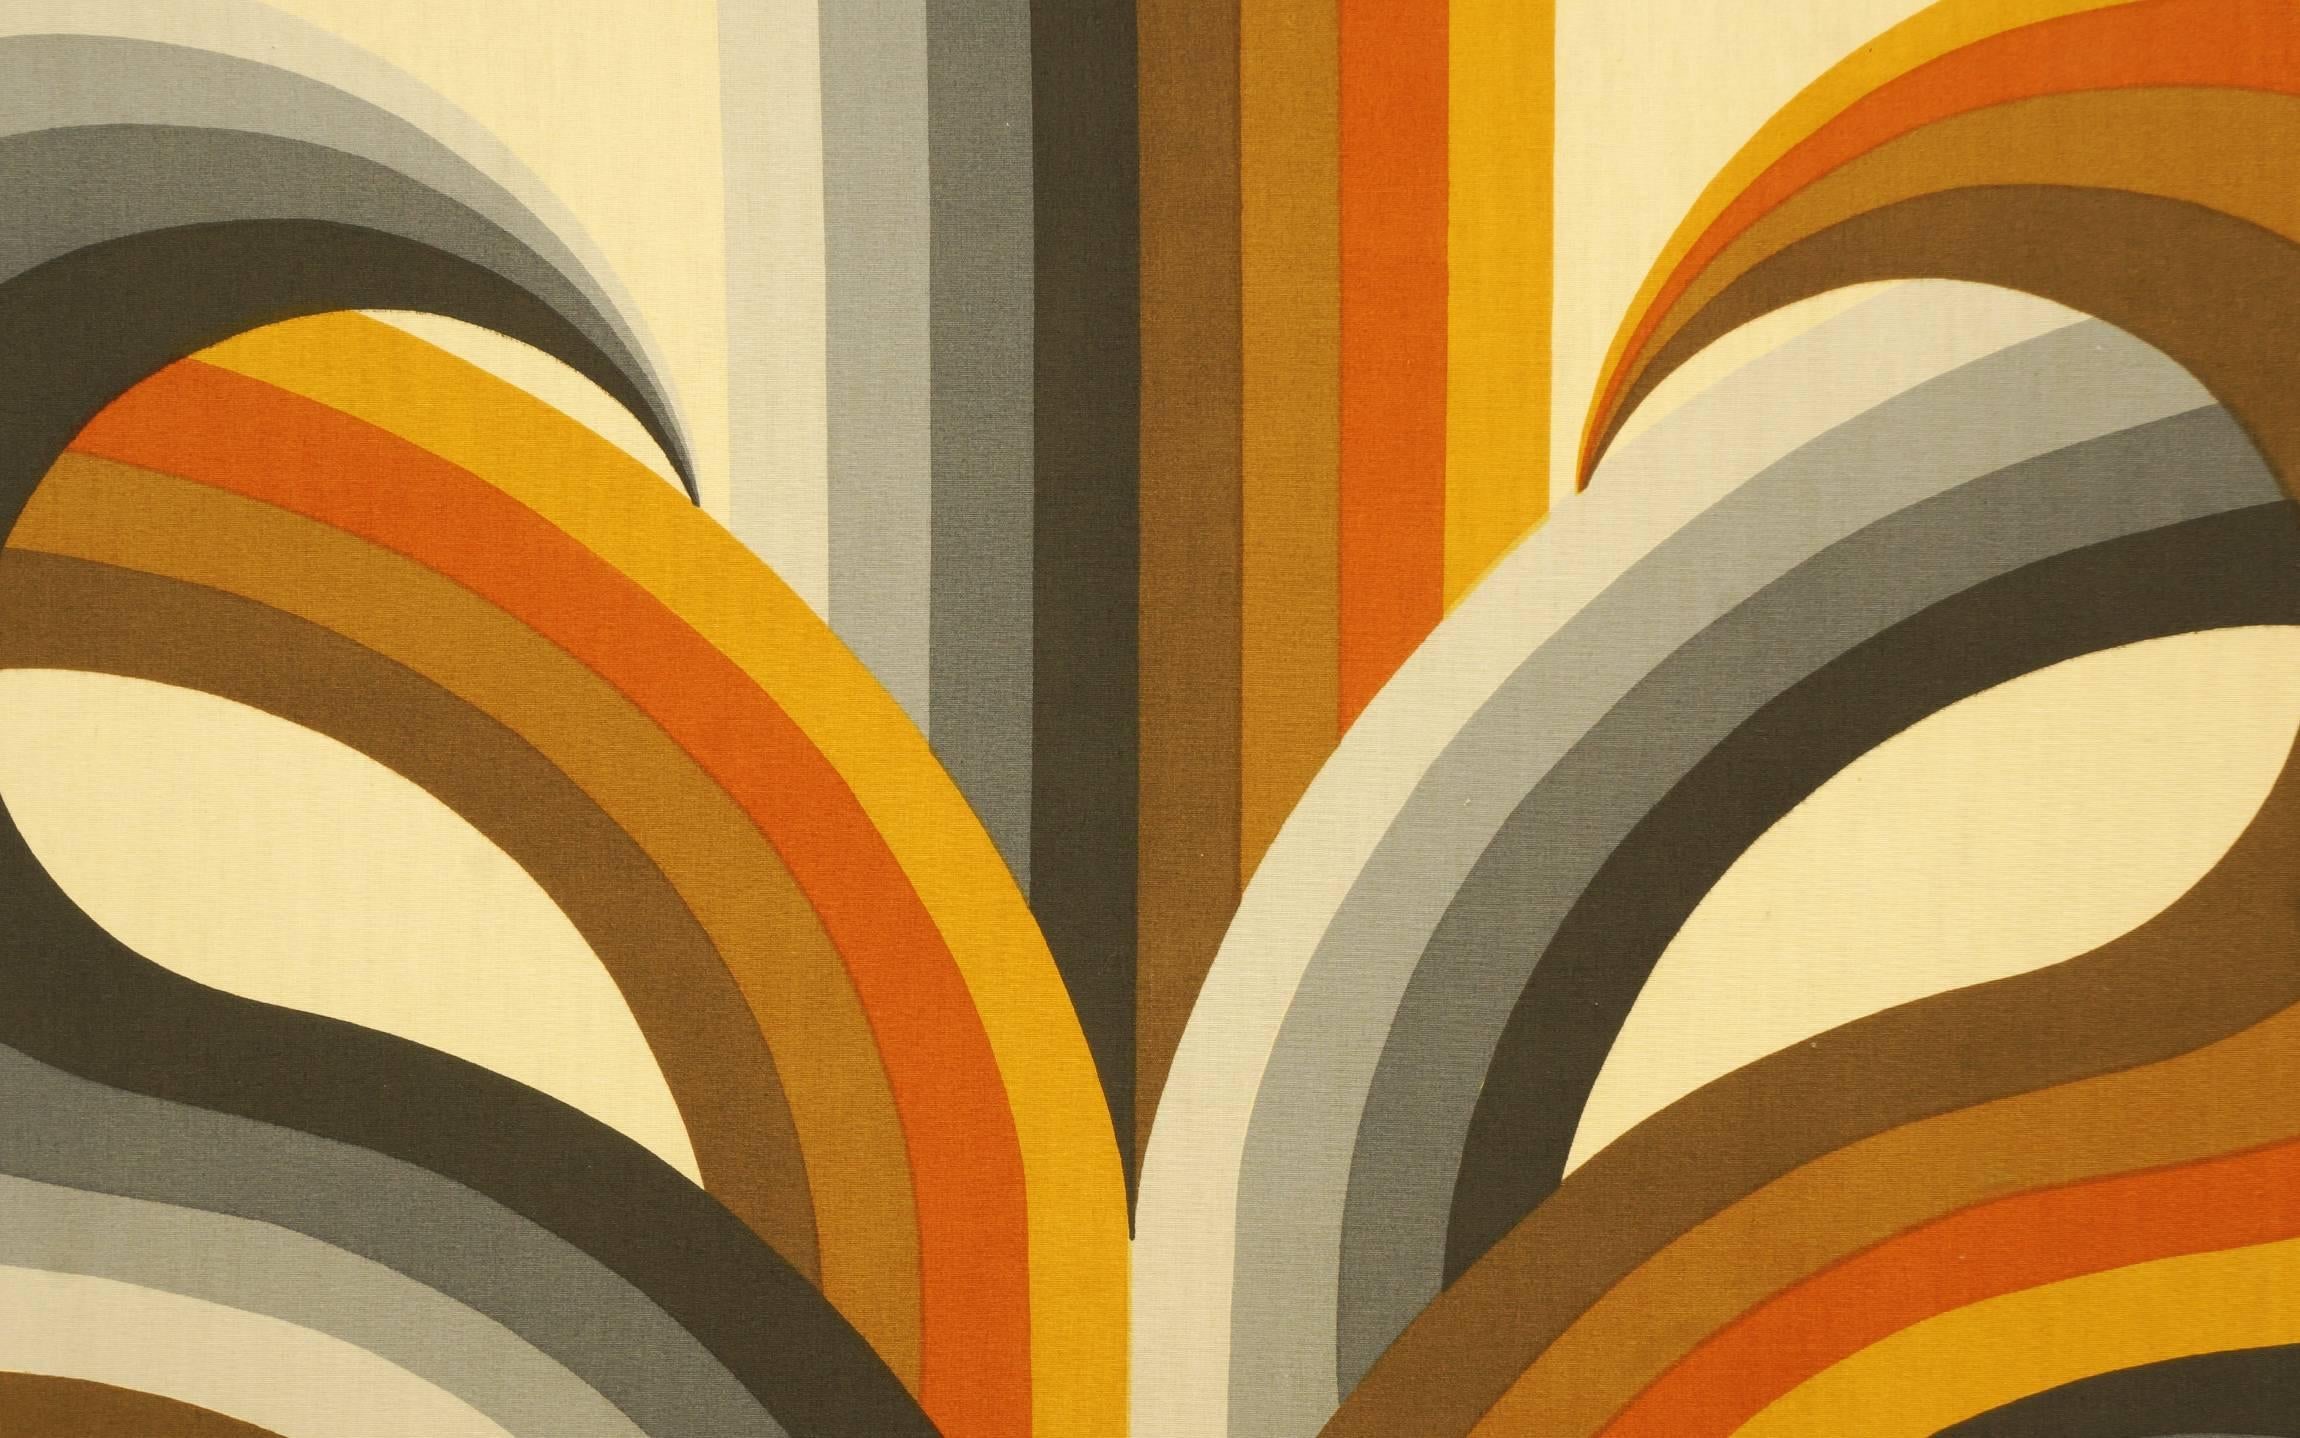 1970s Psychedelic fabric art.  Shades of gray, orange and brown.  